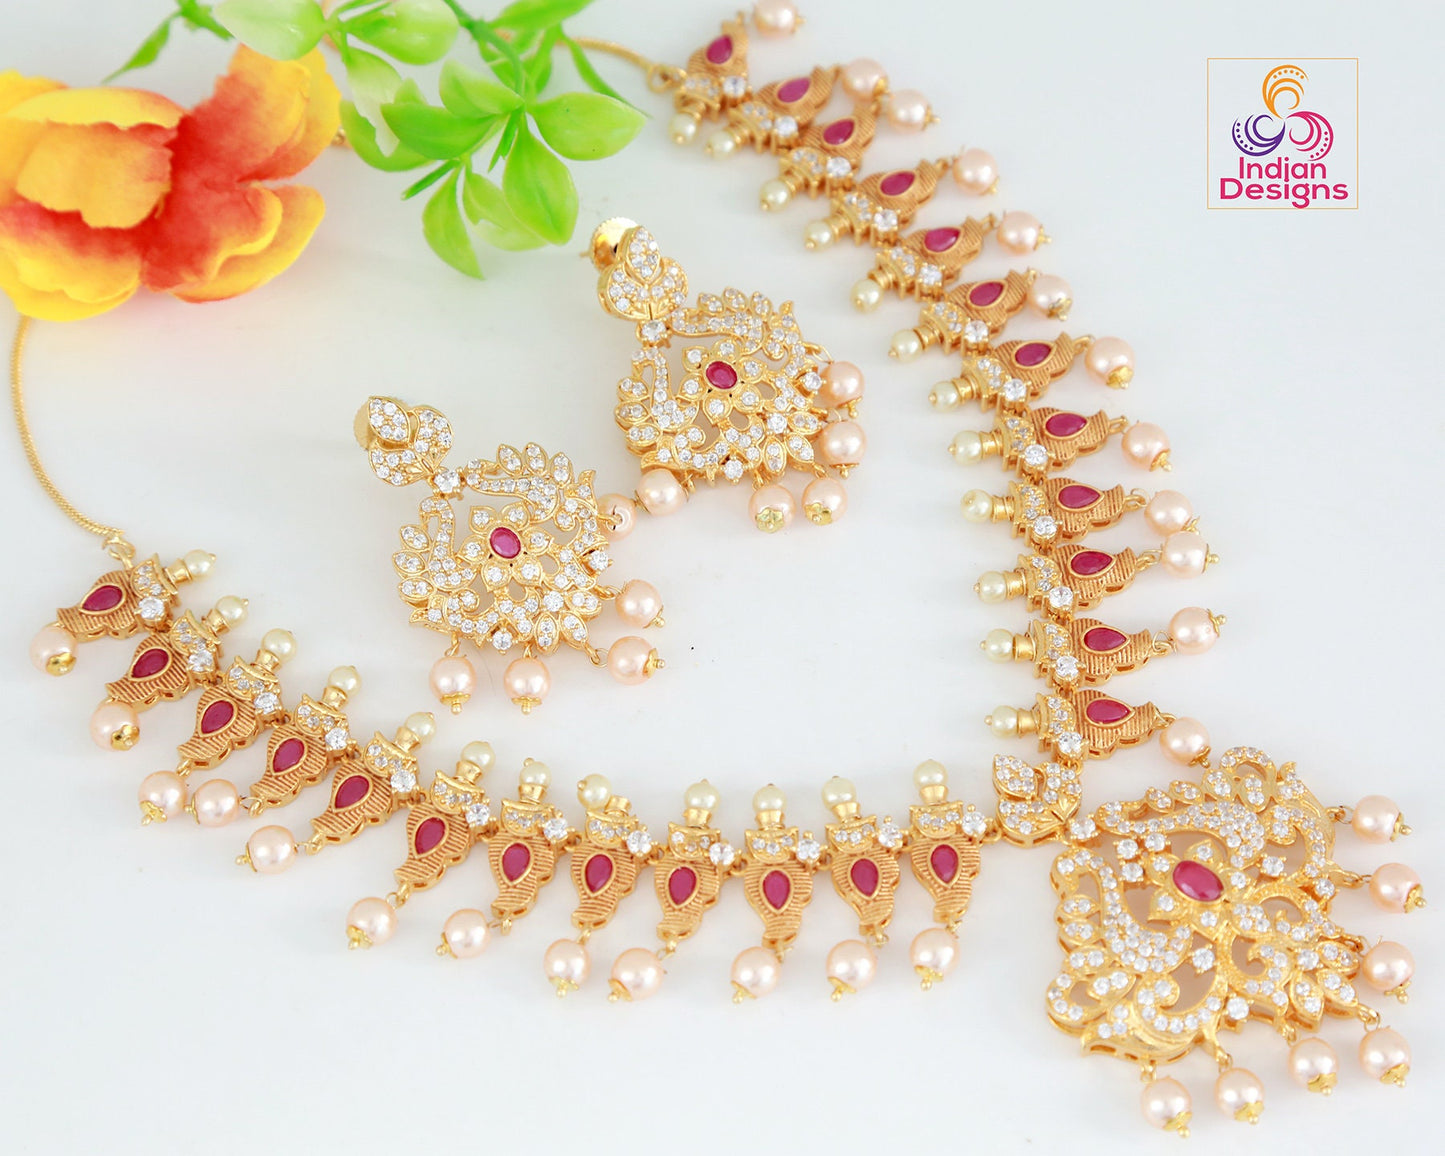 Matte finish gold Plated necklace and earring set, South Indian temple jewelry mango design necklace, ruby emerald necklace with Pearl drops